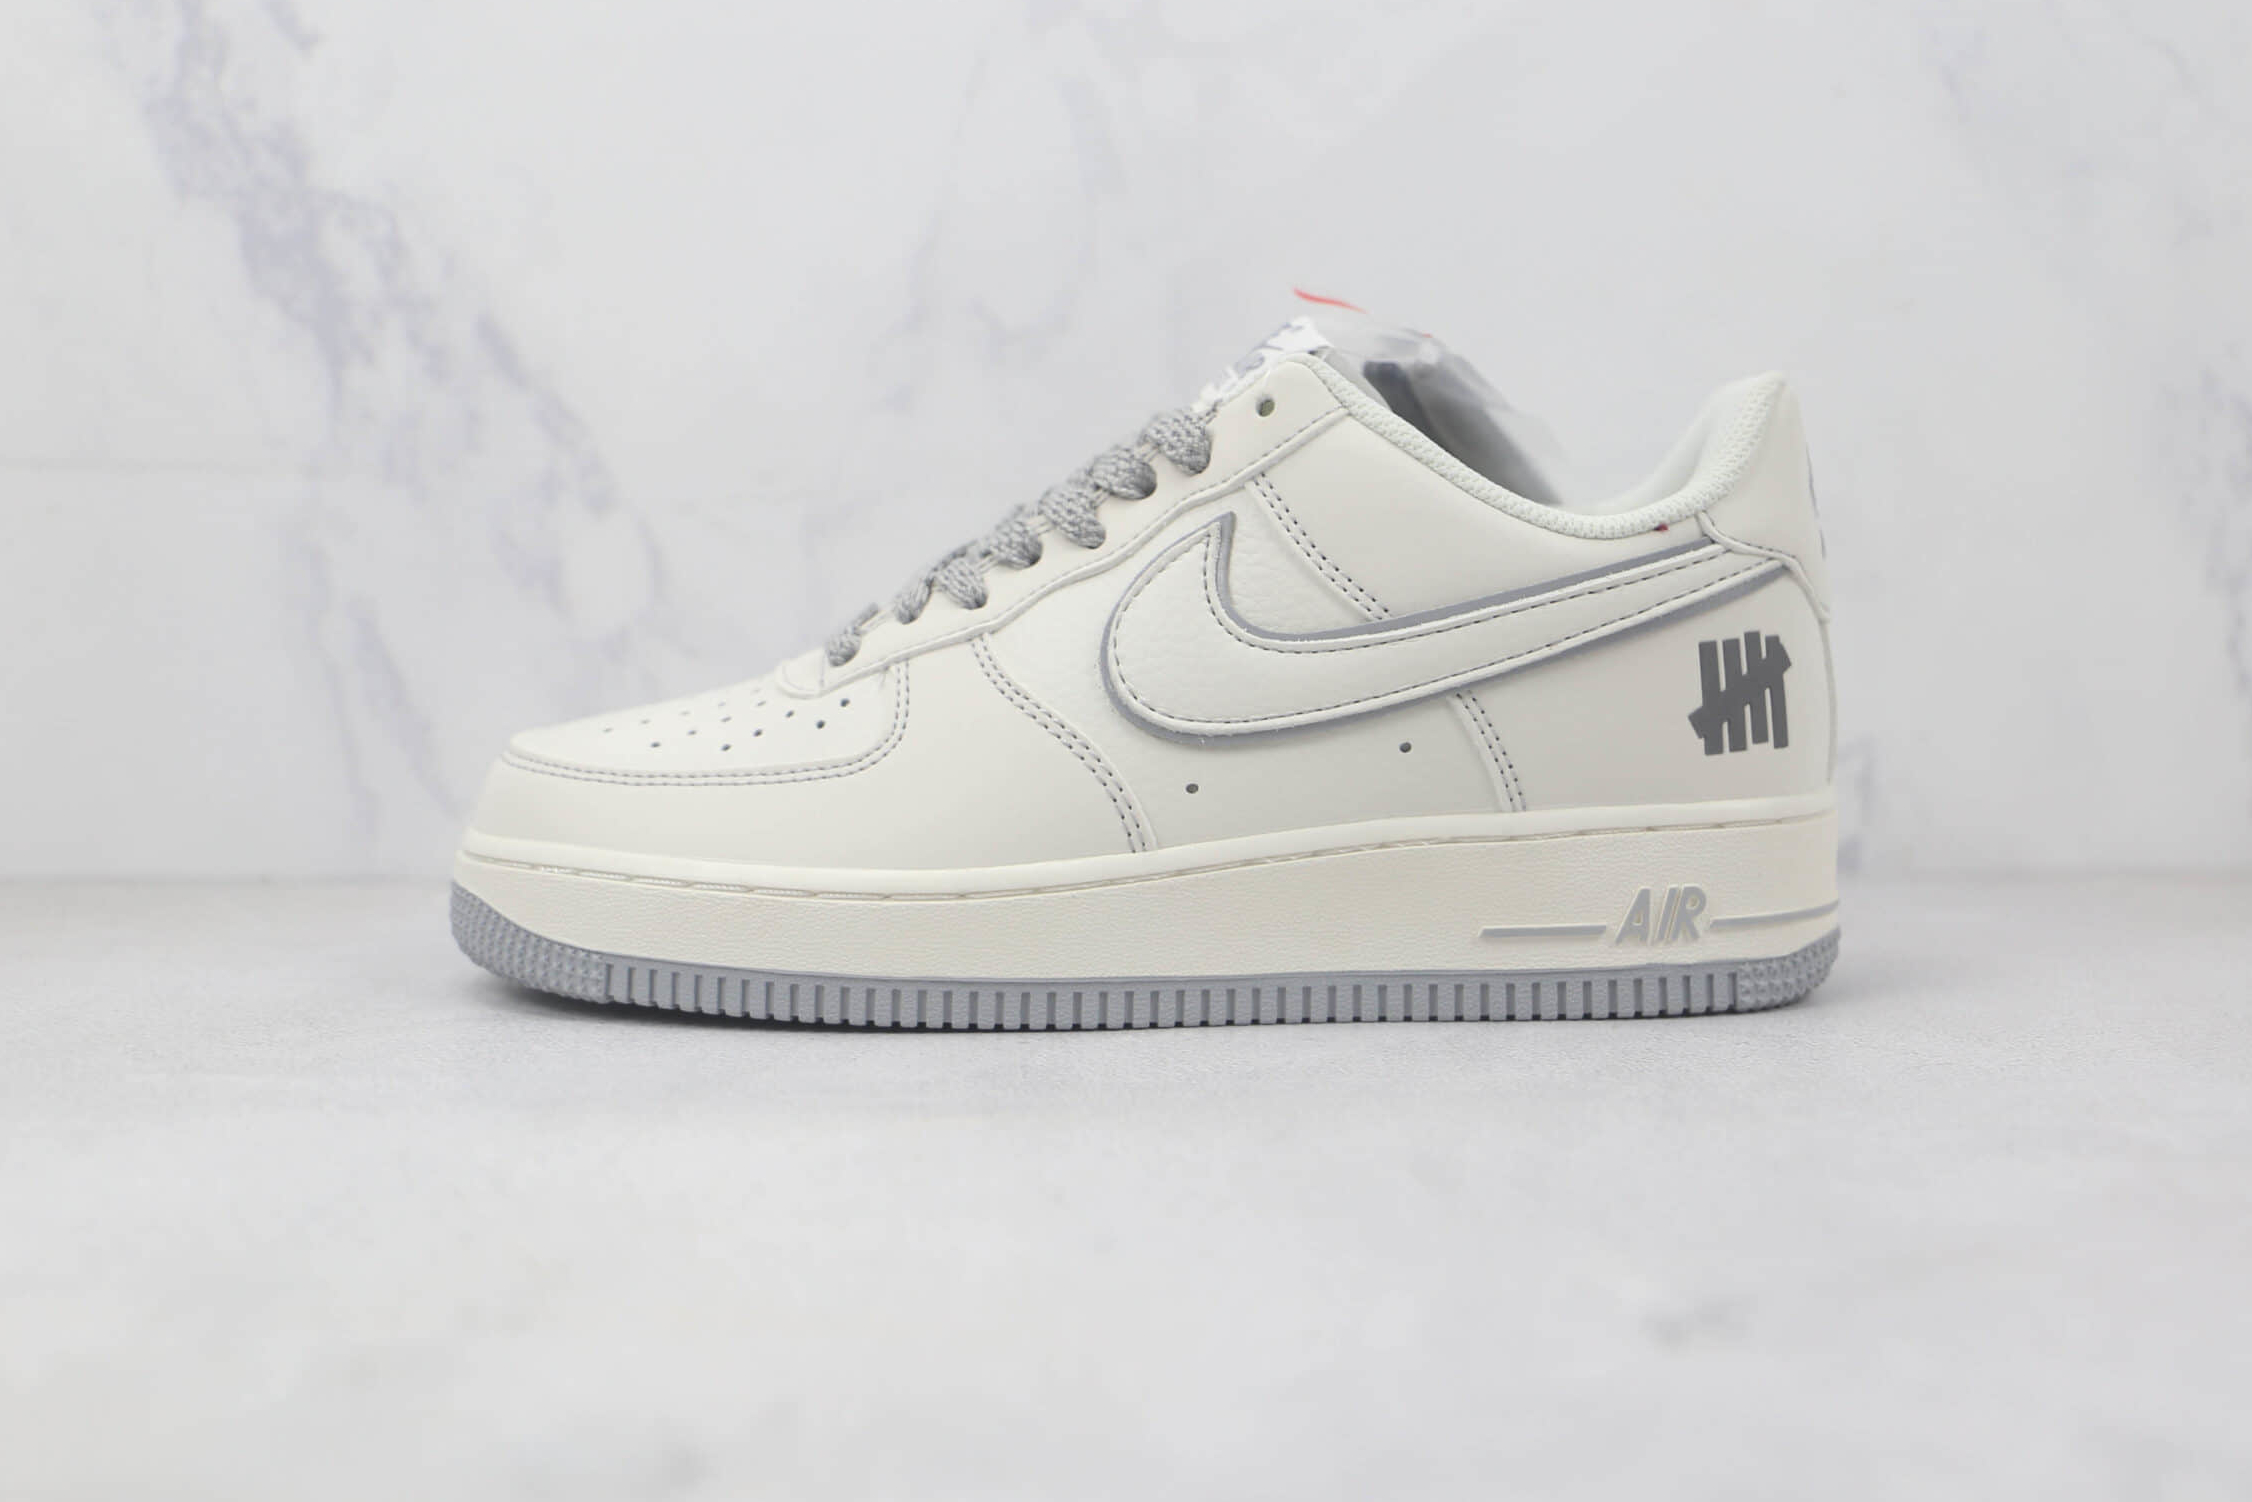 Undefeated x Nike Air Force 1 07 Low Cream Light Grey UN3699-055 - Limited Edition Sneakers